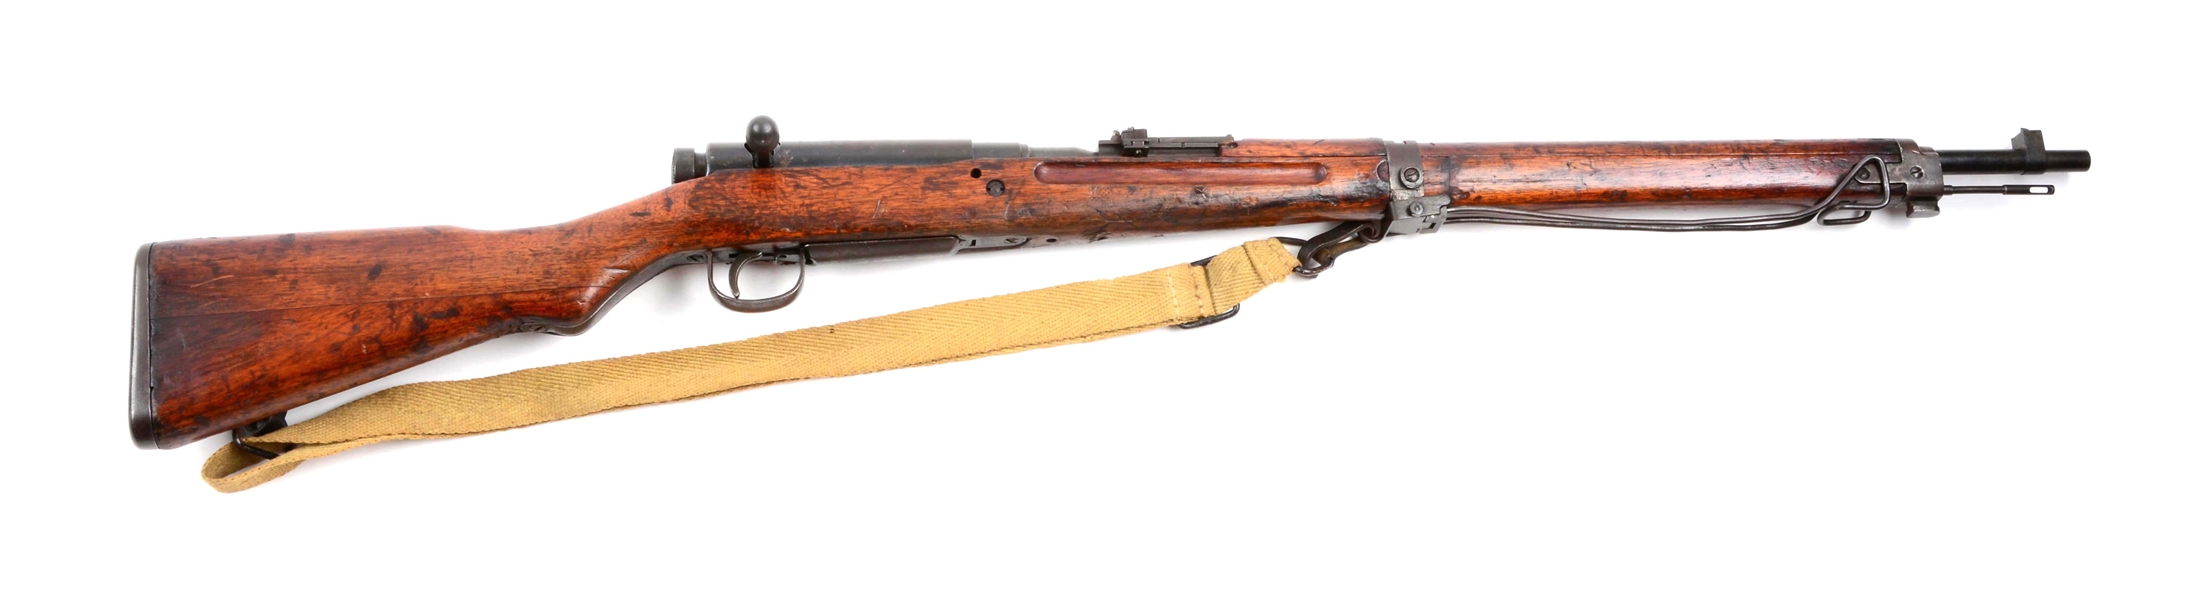 (C) JAPANESE TYPE 99 BOLT ACTION RIFLE WITH SLING.